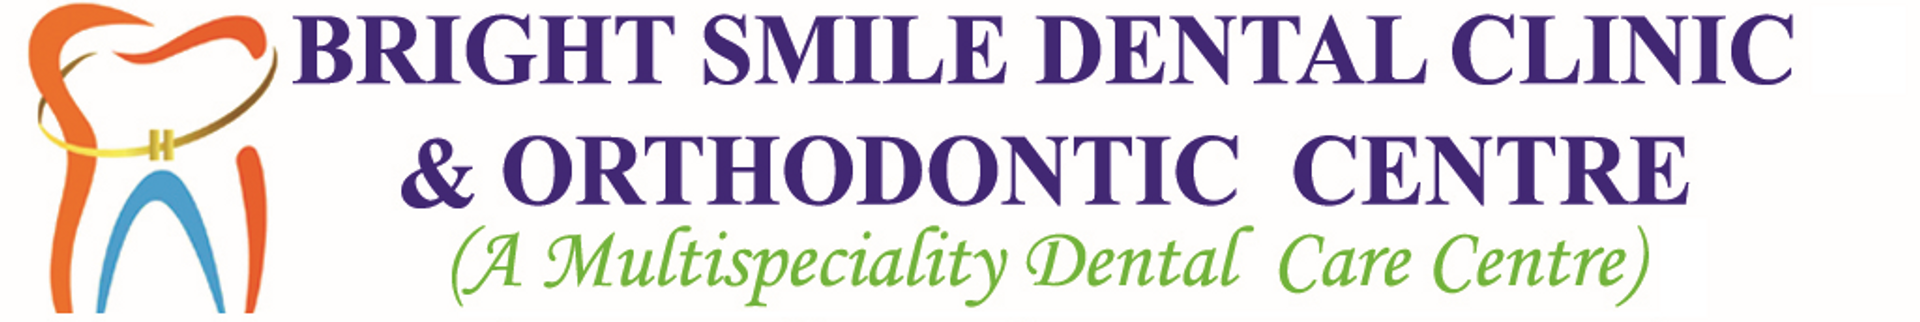 Bright Smile Dental Clinic Orthodontic and Implant Center Logo